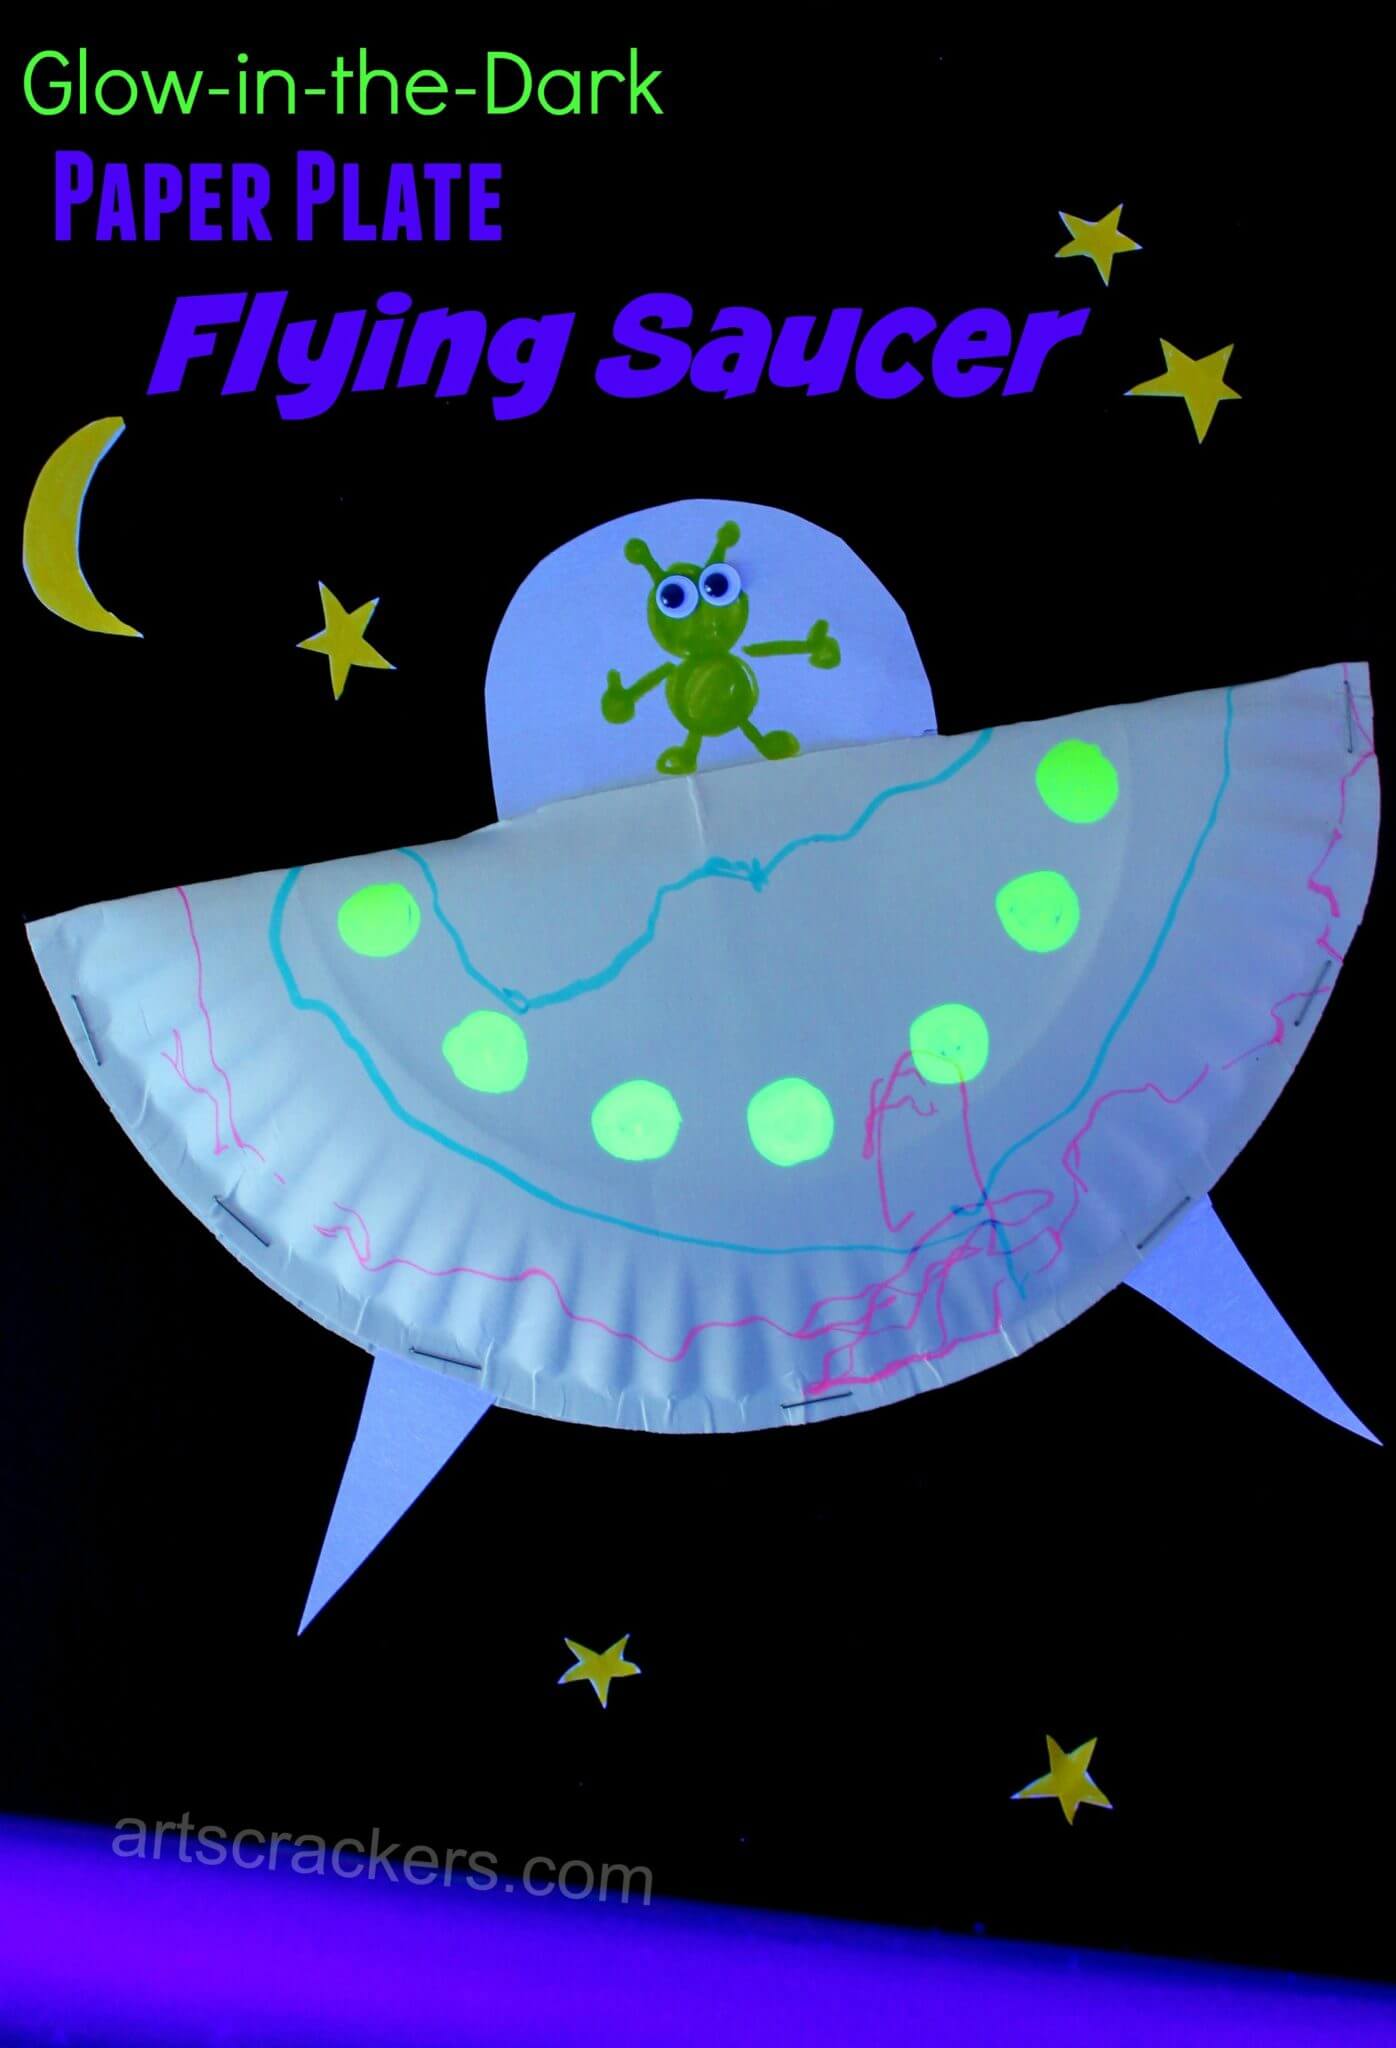 Easy & Quick Paper Plate Flying Saucer That Glow In DarkAlien Craft Ideas for Kids